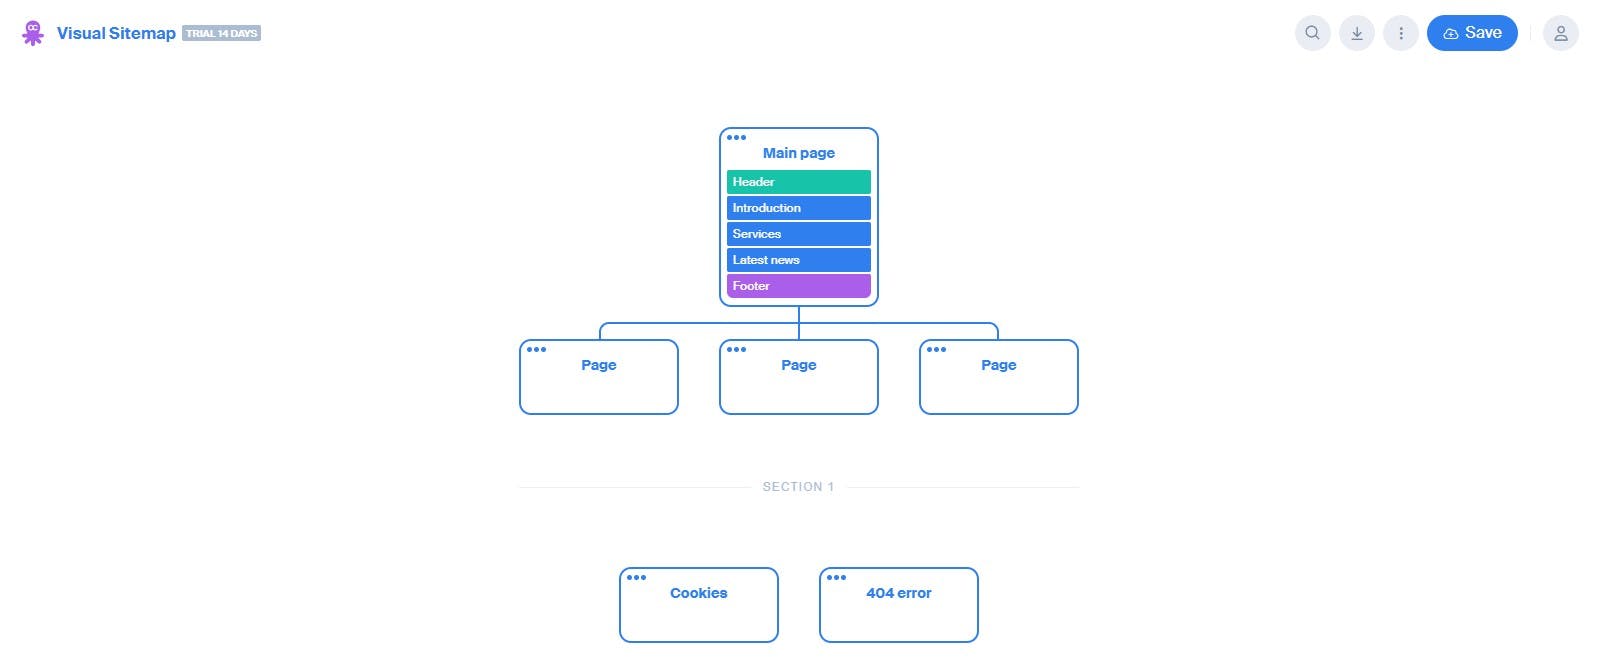 Creation of visual sitemaps and user flow diagrams using Octopus